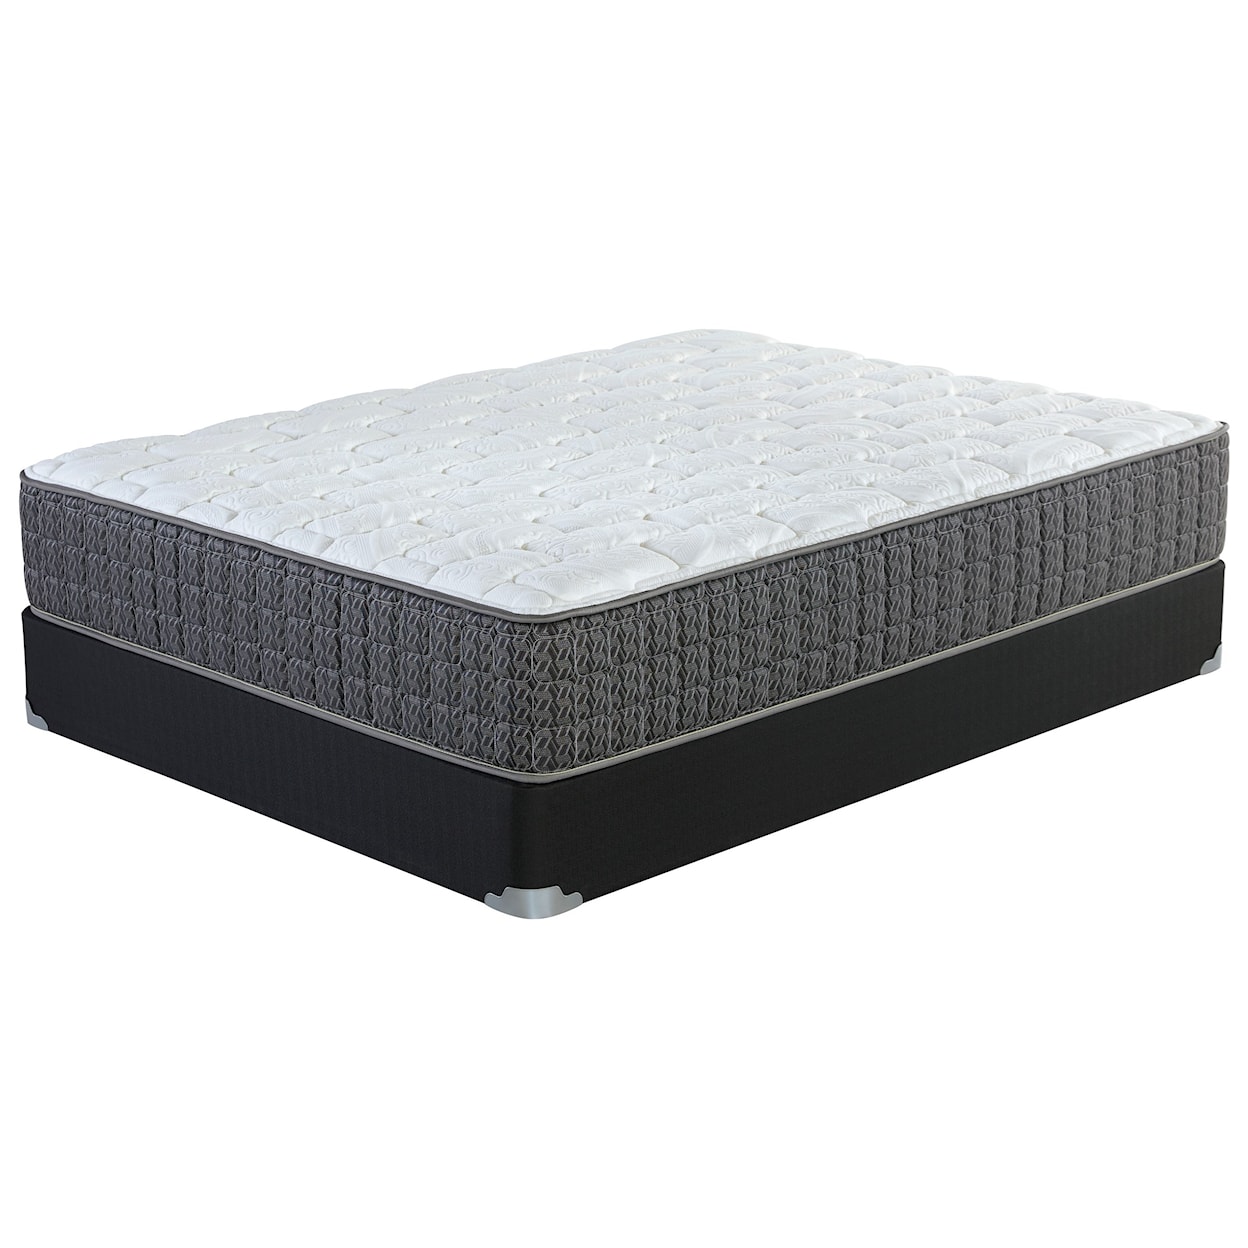 Corsicana Kinley Firm King Firm Pocketed Coil Mattress Set